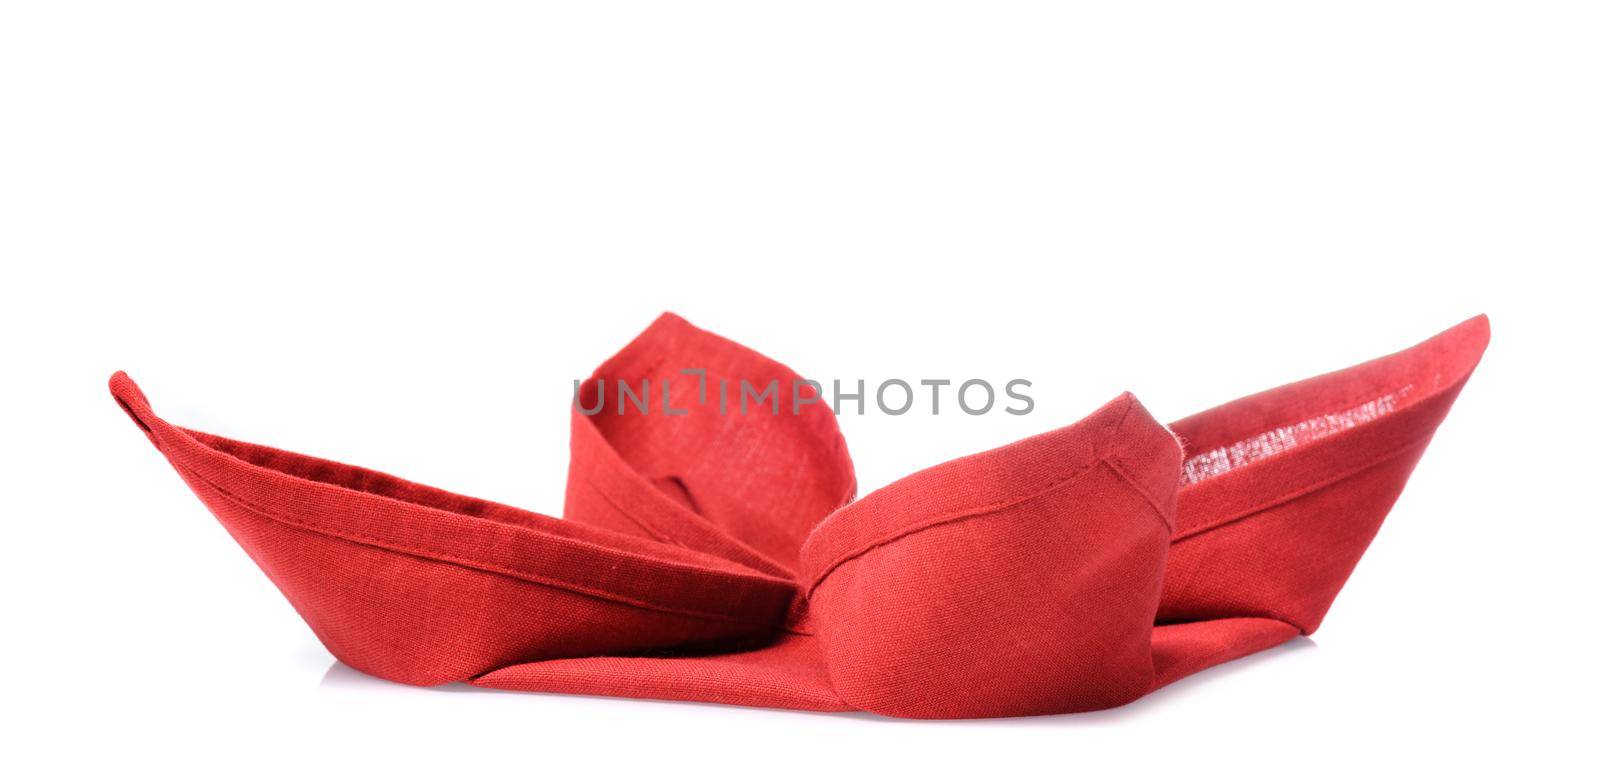 folded red napkin by norgal